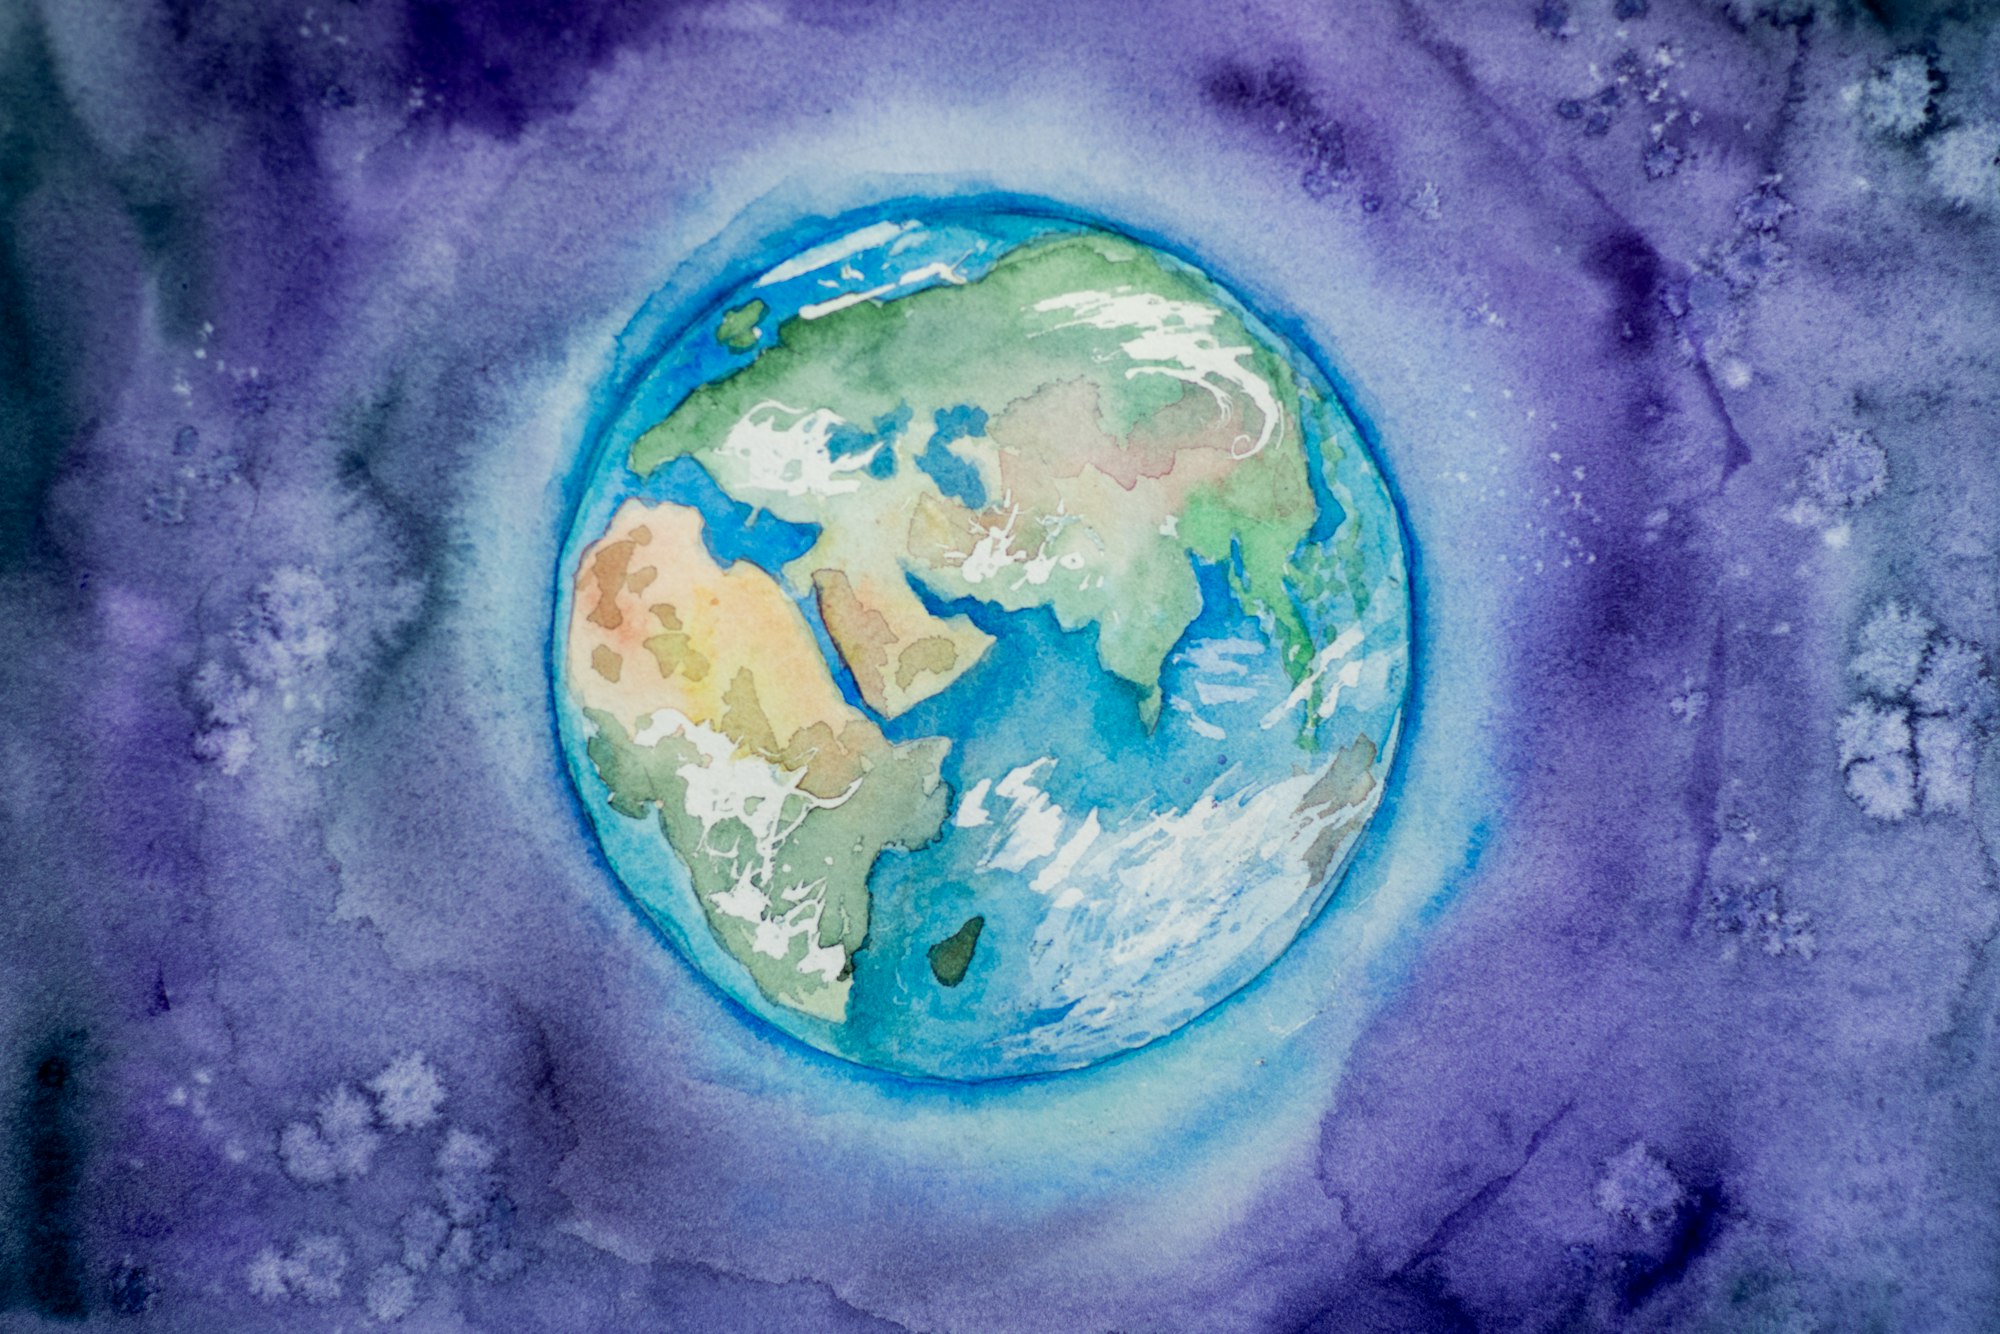 Planet Earth (Africa, Europa, Asia) painted by watercolor